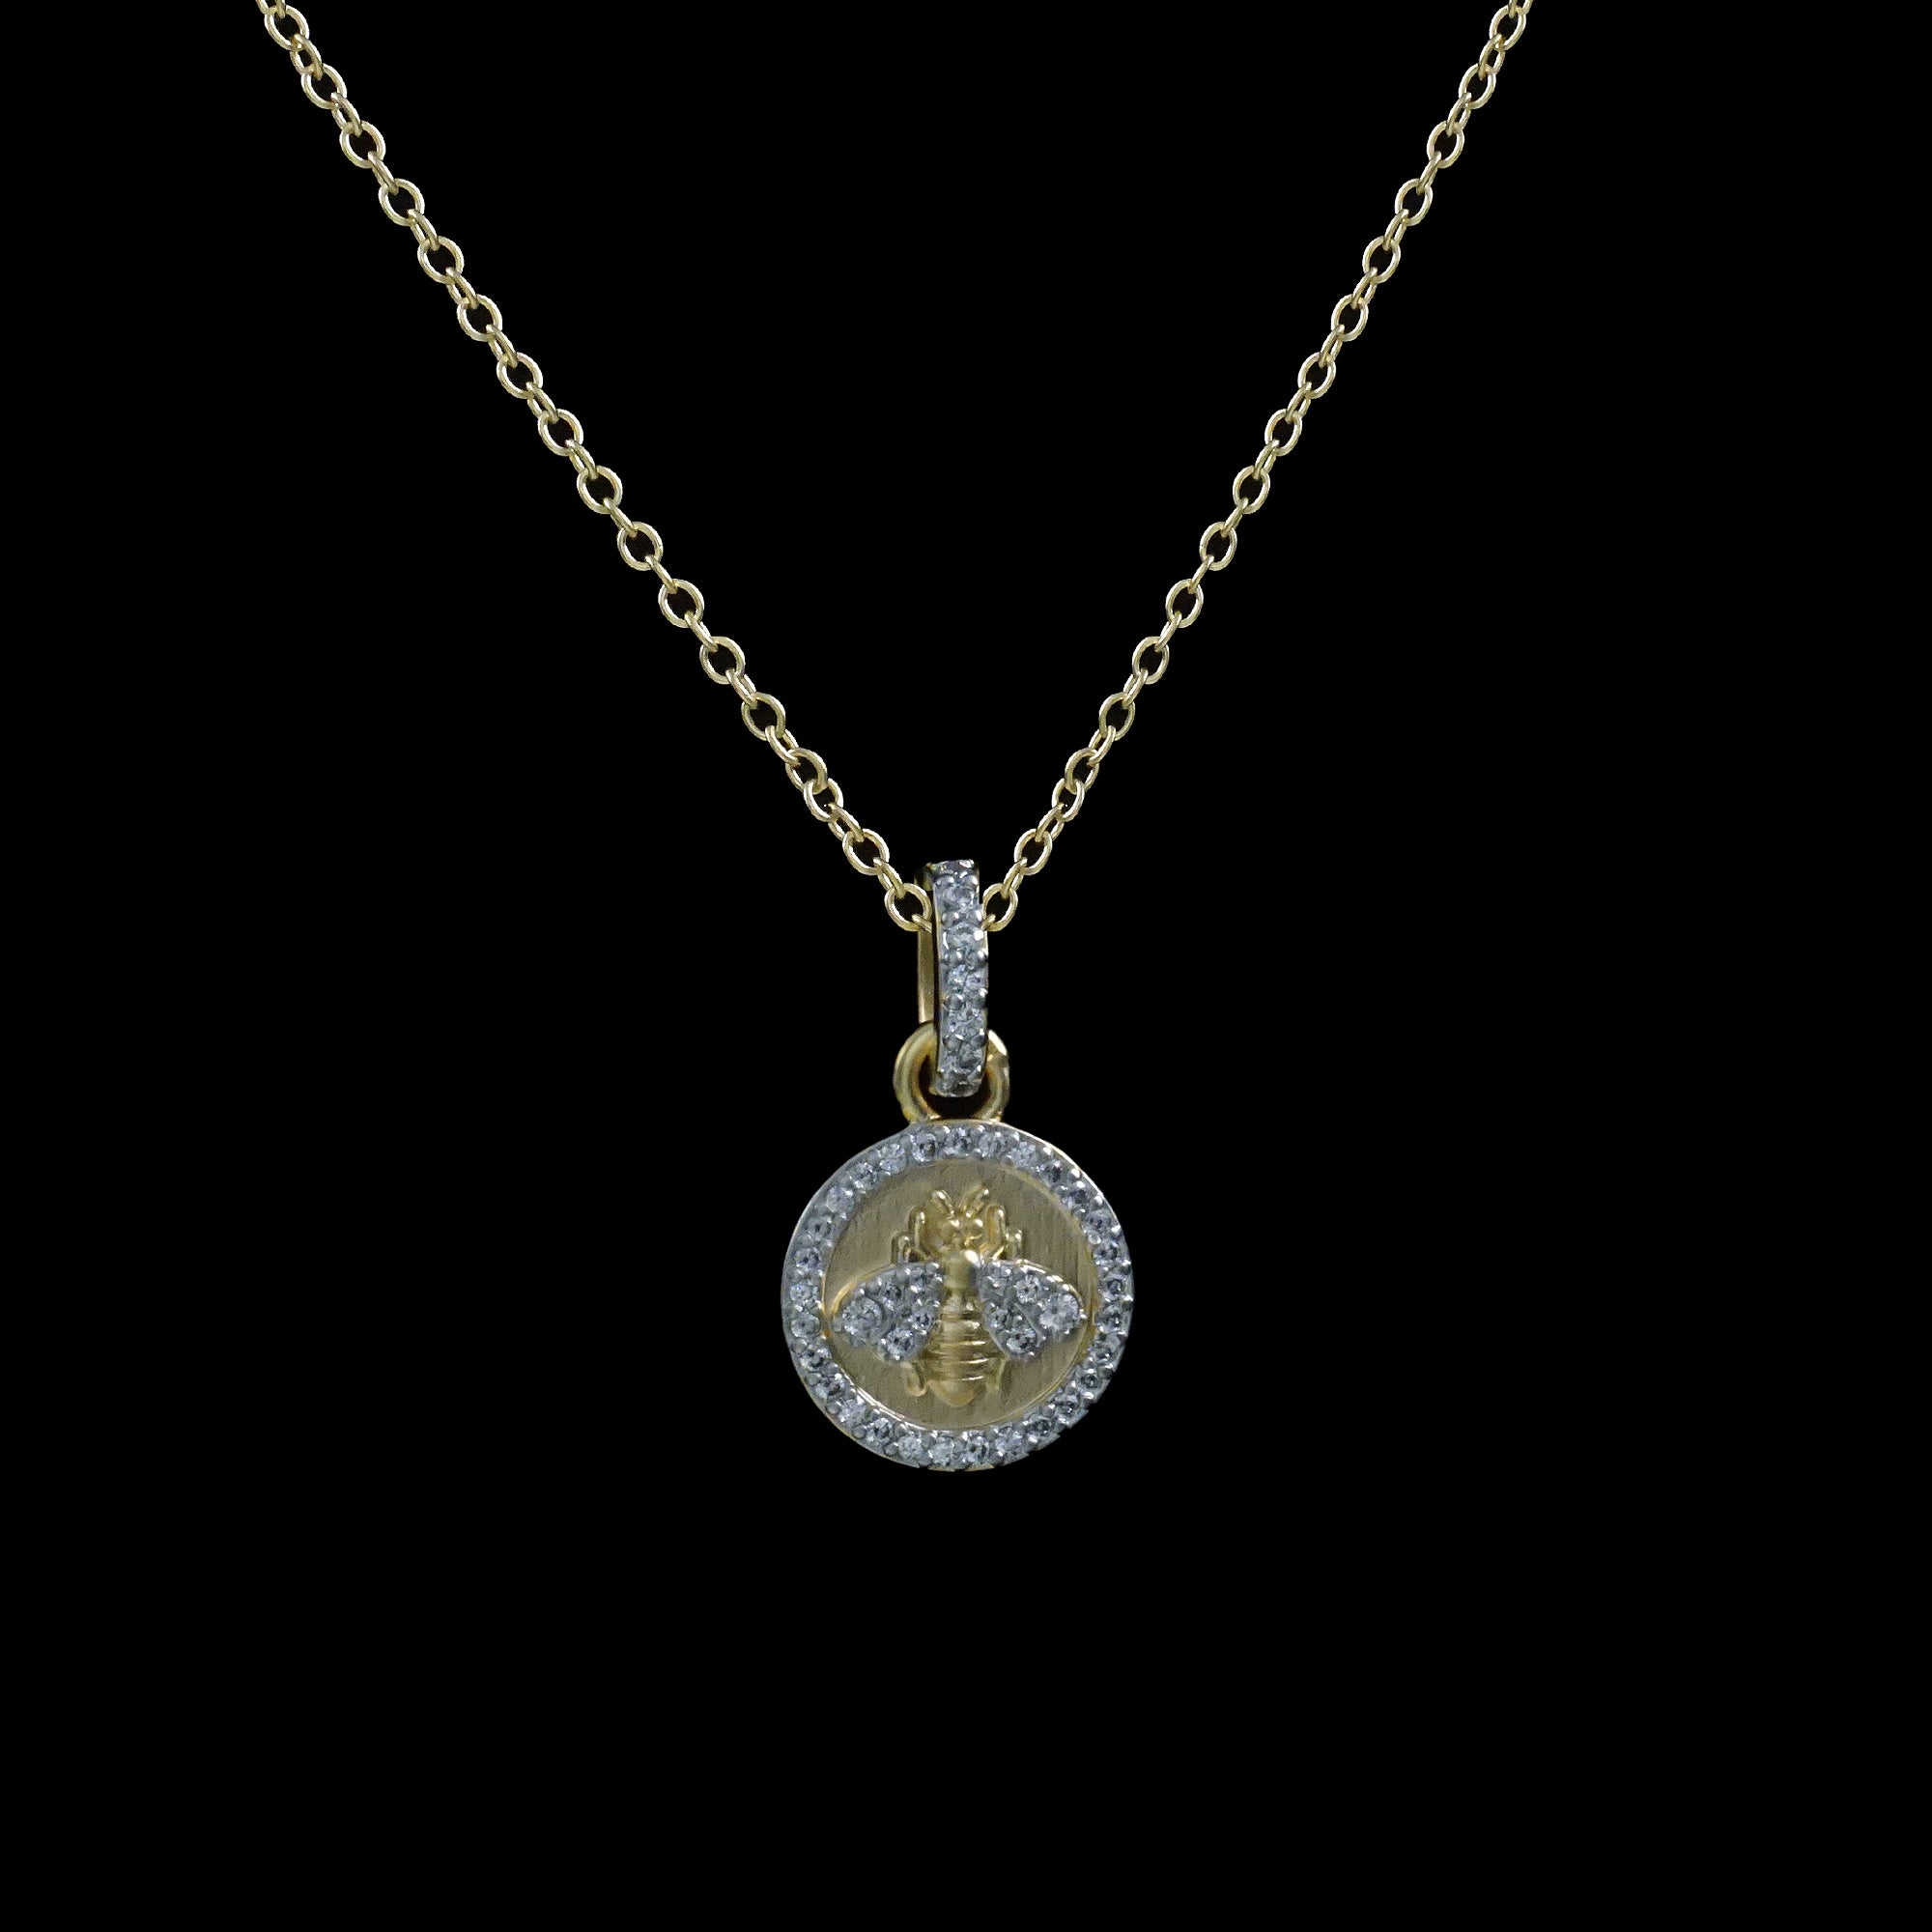 Bee Disc Necklace